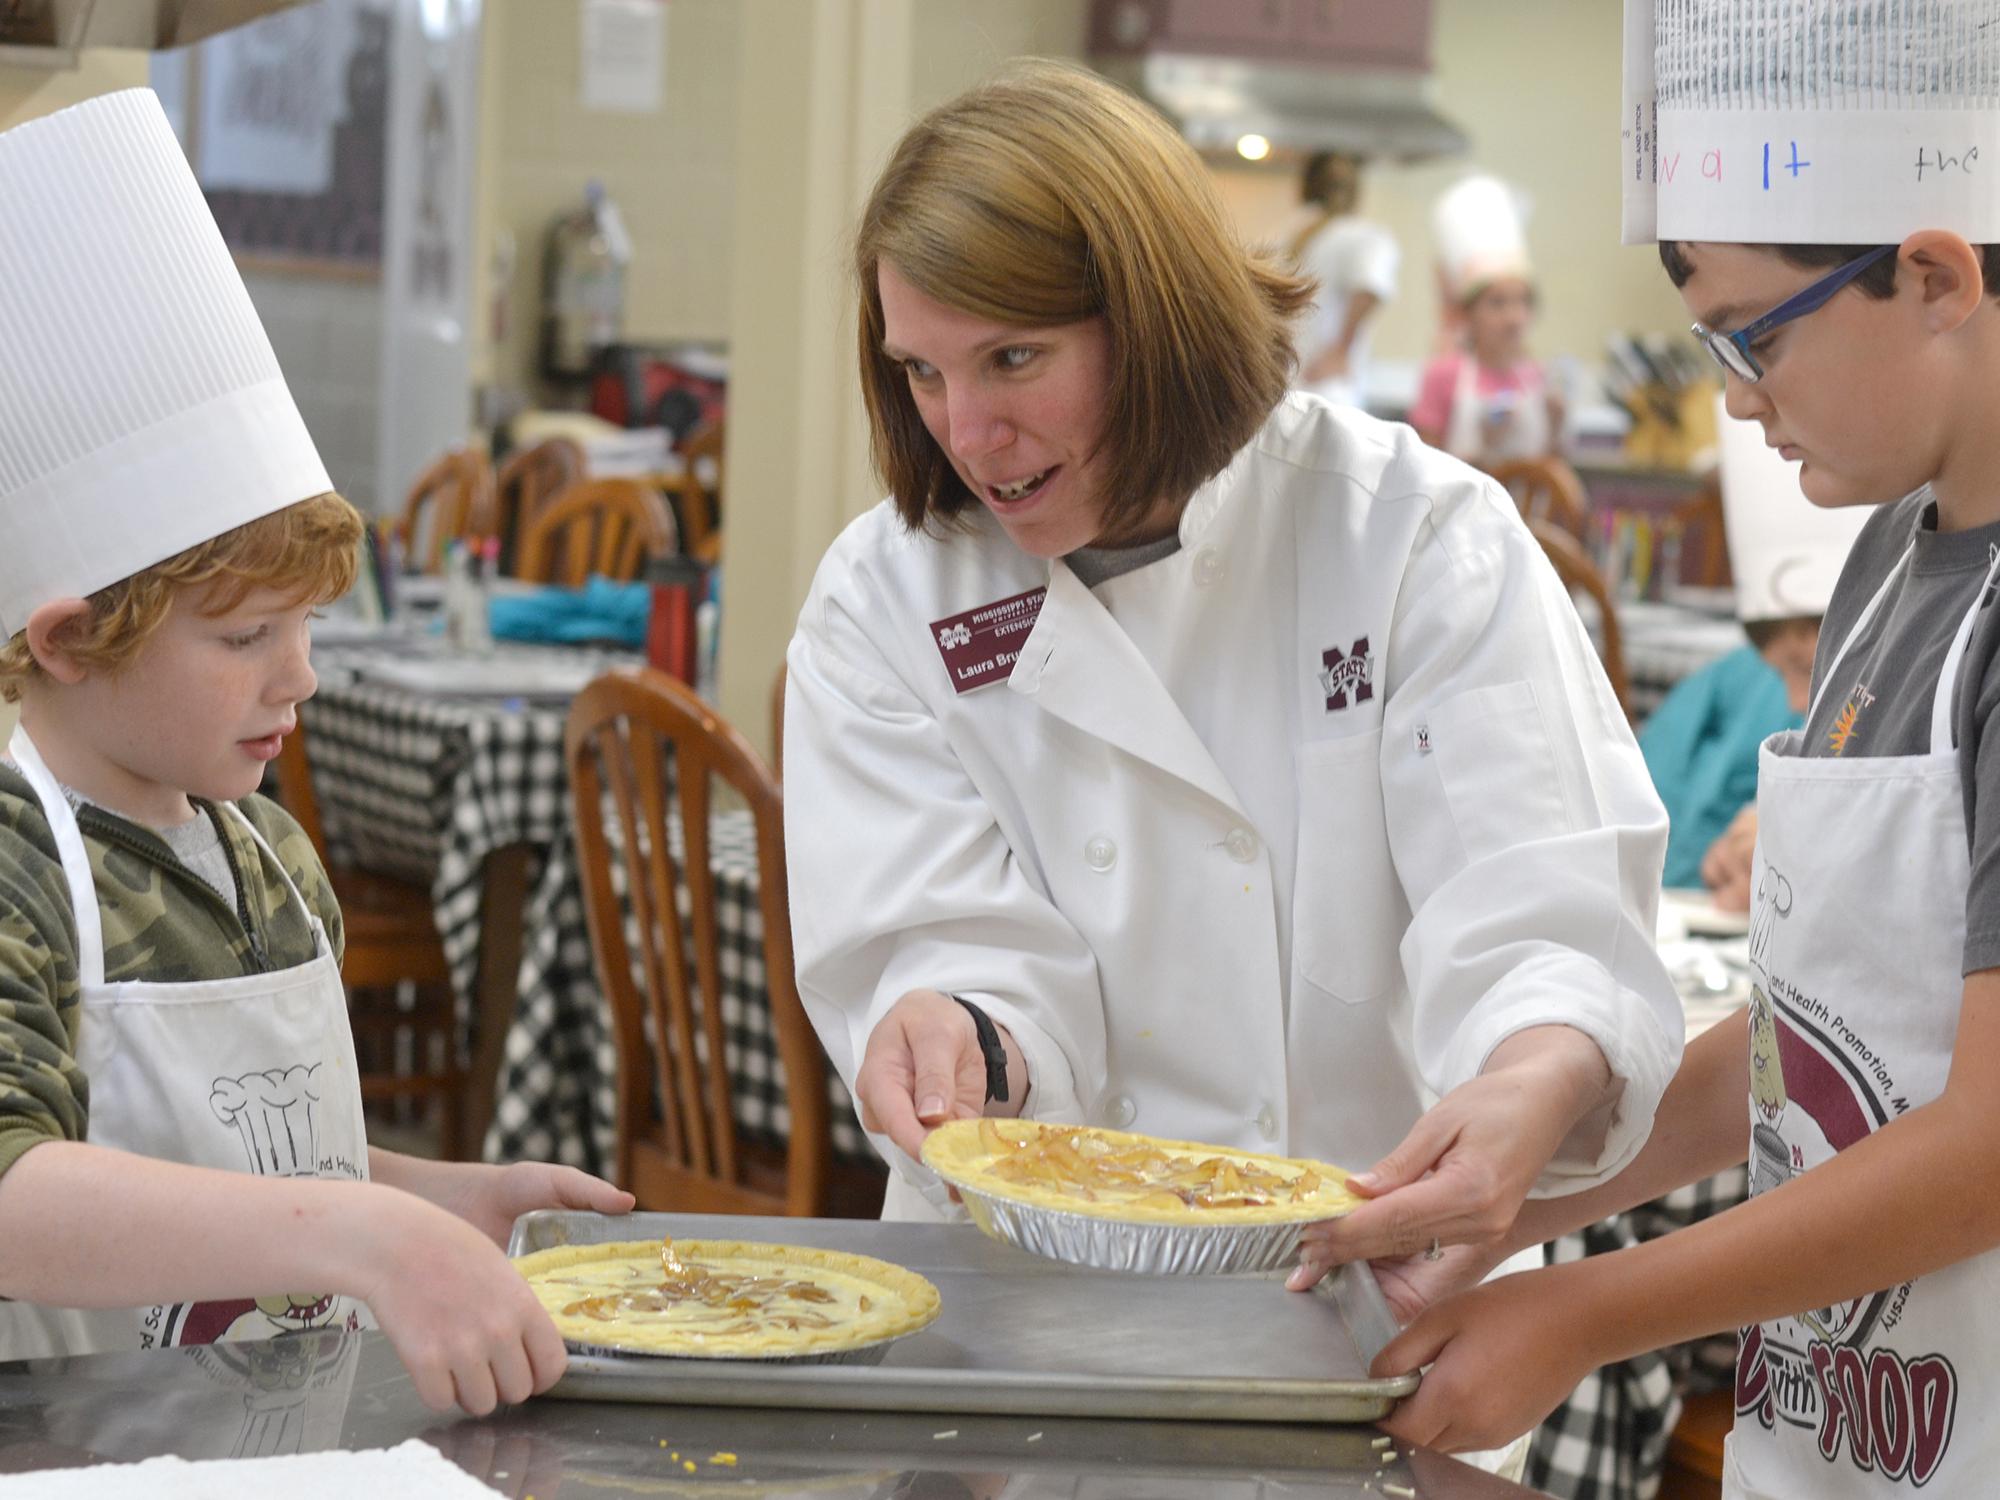 Laura Brumbaugh (center), Mississippi State University Extension Service agent in Tate County, helps Harlan Tagert, left, and Walt Giesen, both of Starkville, finish their quiches on June 21, 2016, at the MSU Fun with Food Camp. The annual summer camp offers hands-on training and educational field trips for 3rd- to 6th-grade children to learn about nutrition, cooking and food safety. (Photo by MSU Extension Service/Michaela Parker) 